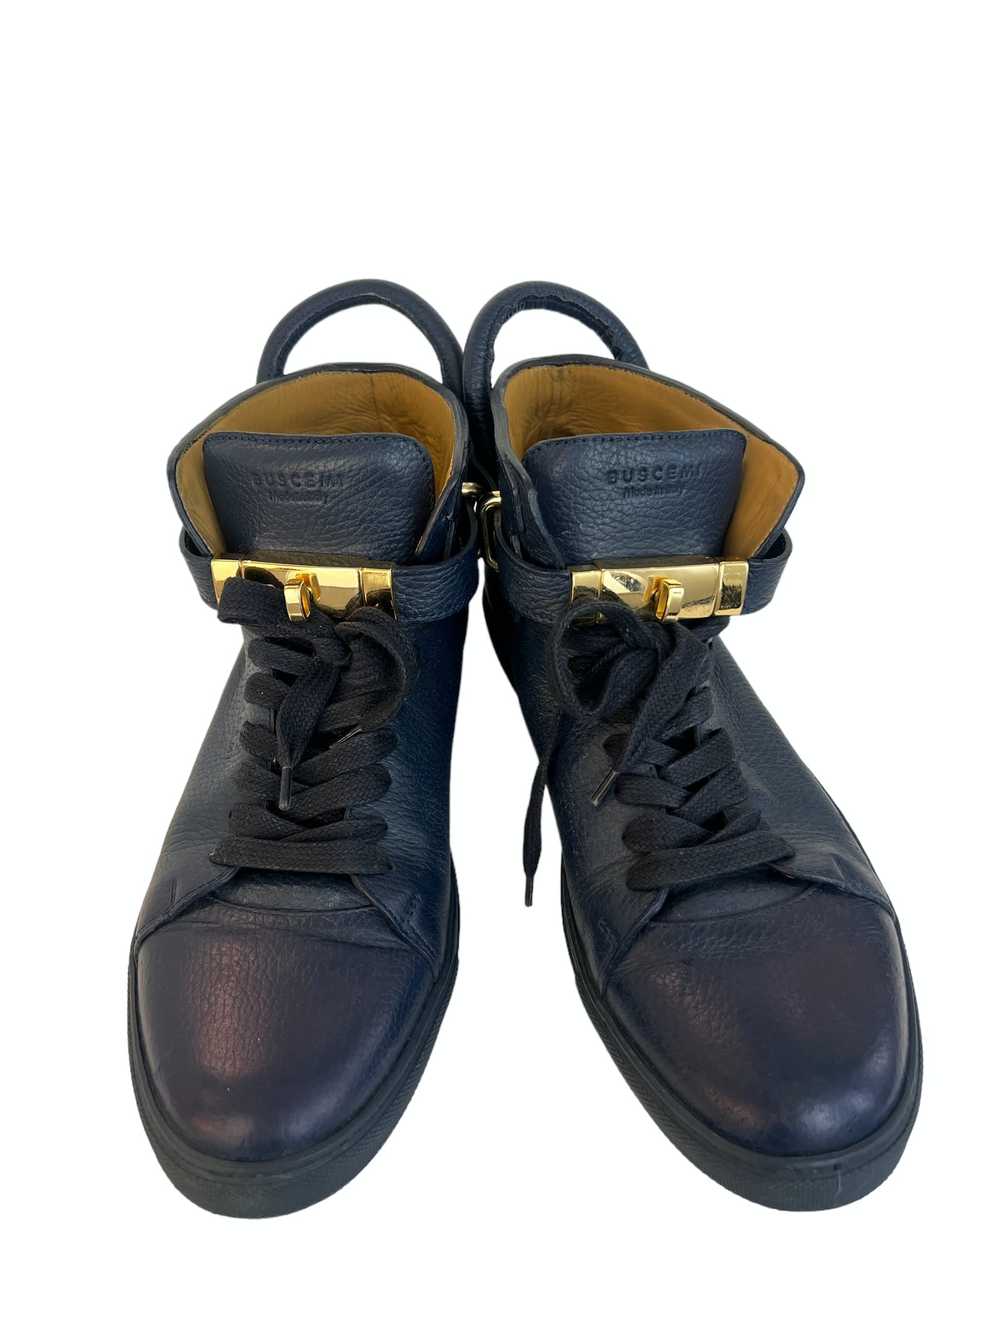 Buscemi Buscemi 100 mm high tops sneakers - image 2